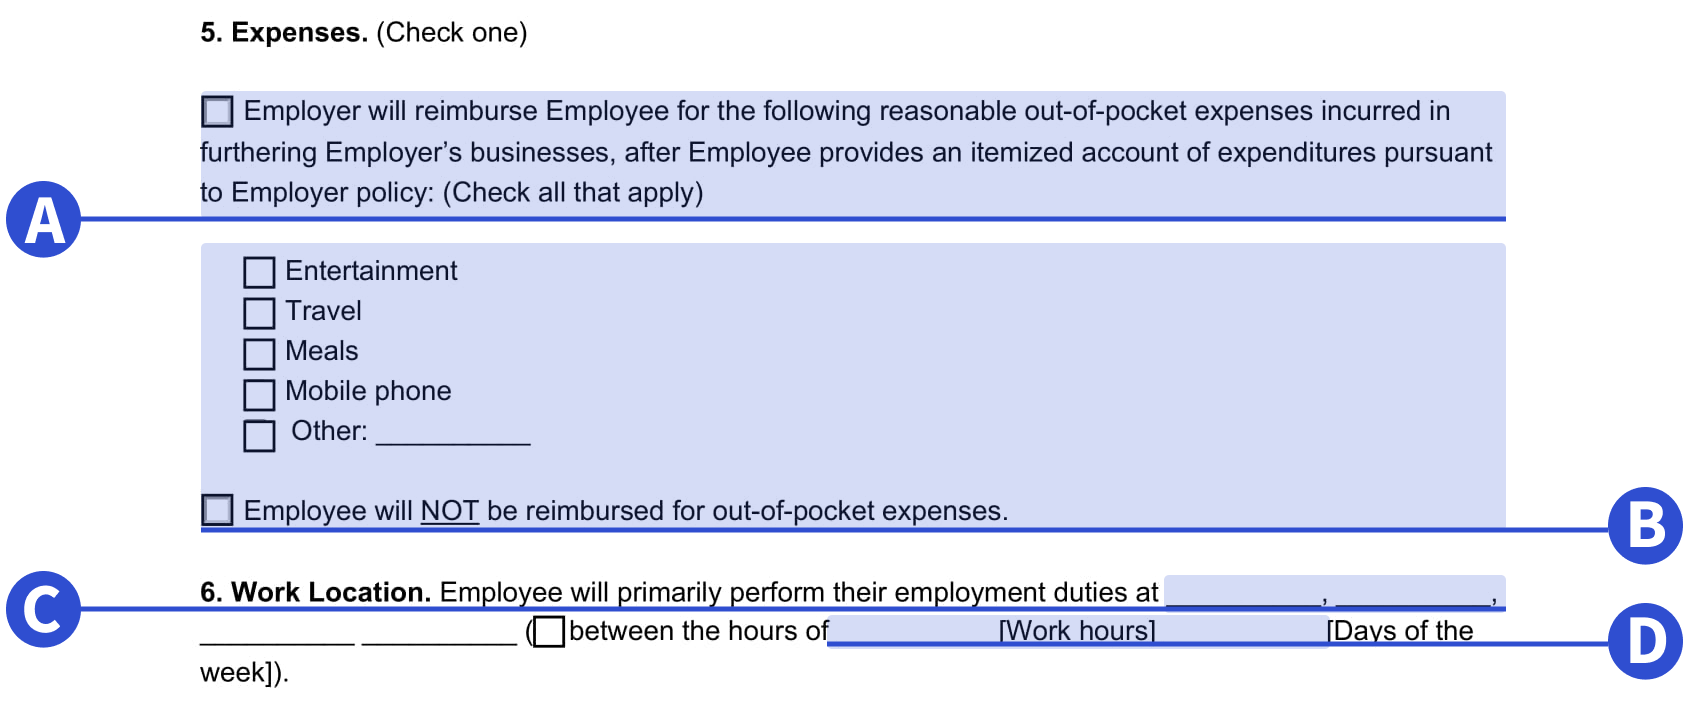 Where to detail expenses and work location information in our employment agreement template.